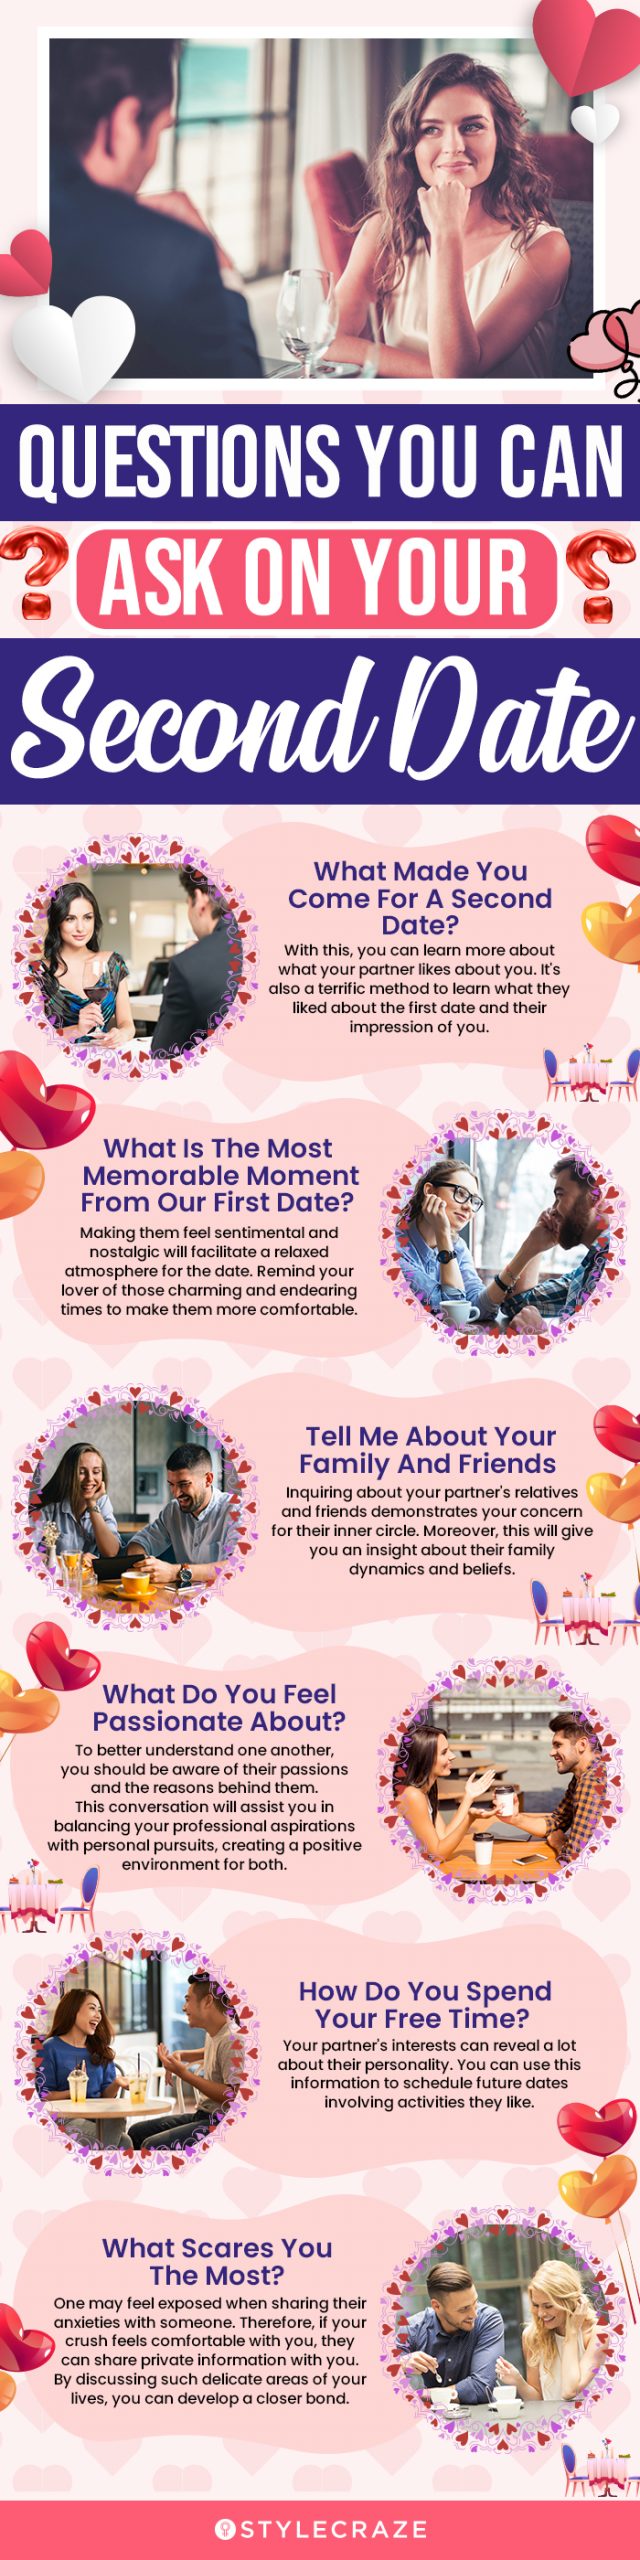 questions you can ask on your second date (infographic)